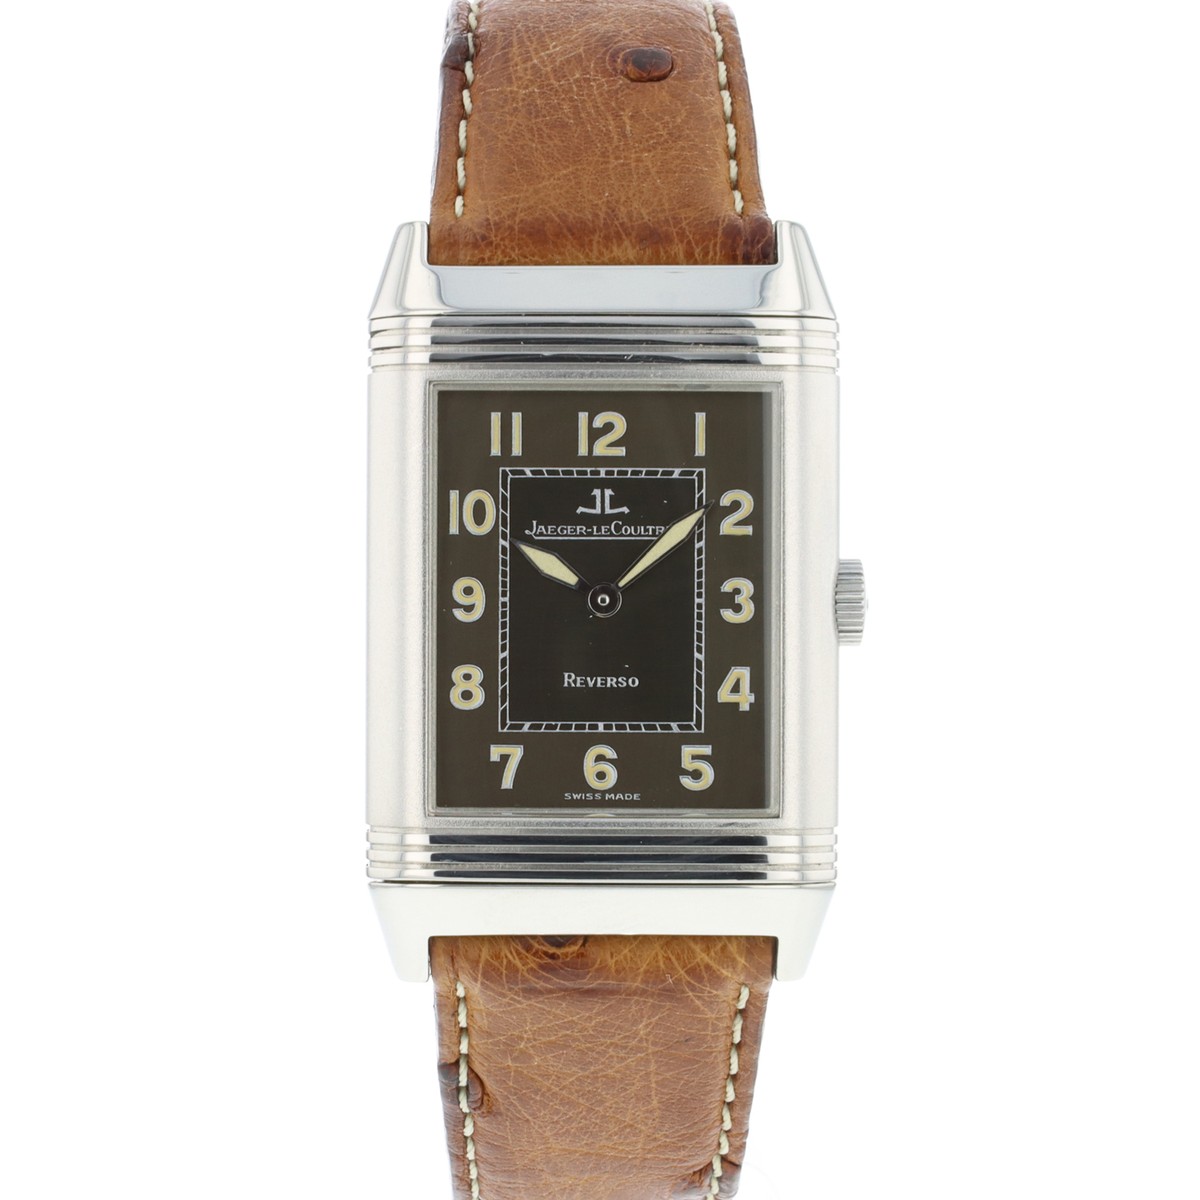 http%3A%2F%2Fmedia.juwelierburger.com%2Fwebshop-images%2Fproducts%2FJaeger_LeCoultre%2F28482%2FJaegerLeCoultreReversoHommage-00